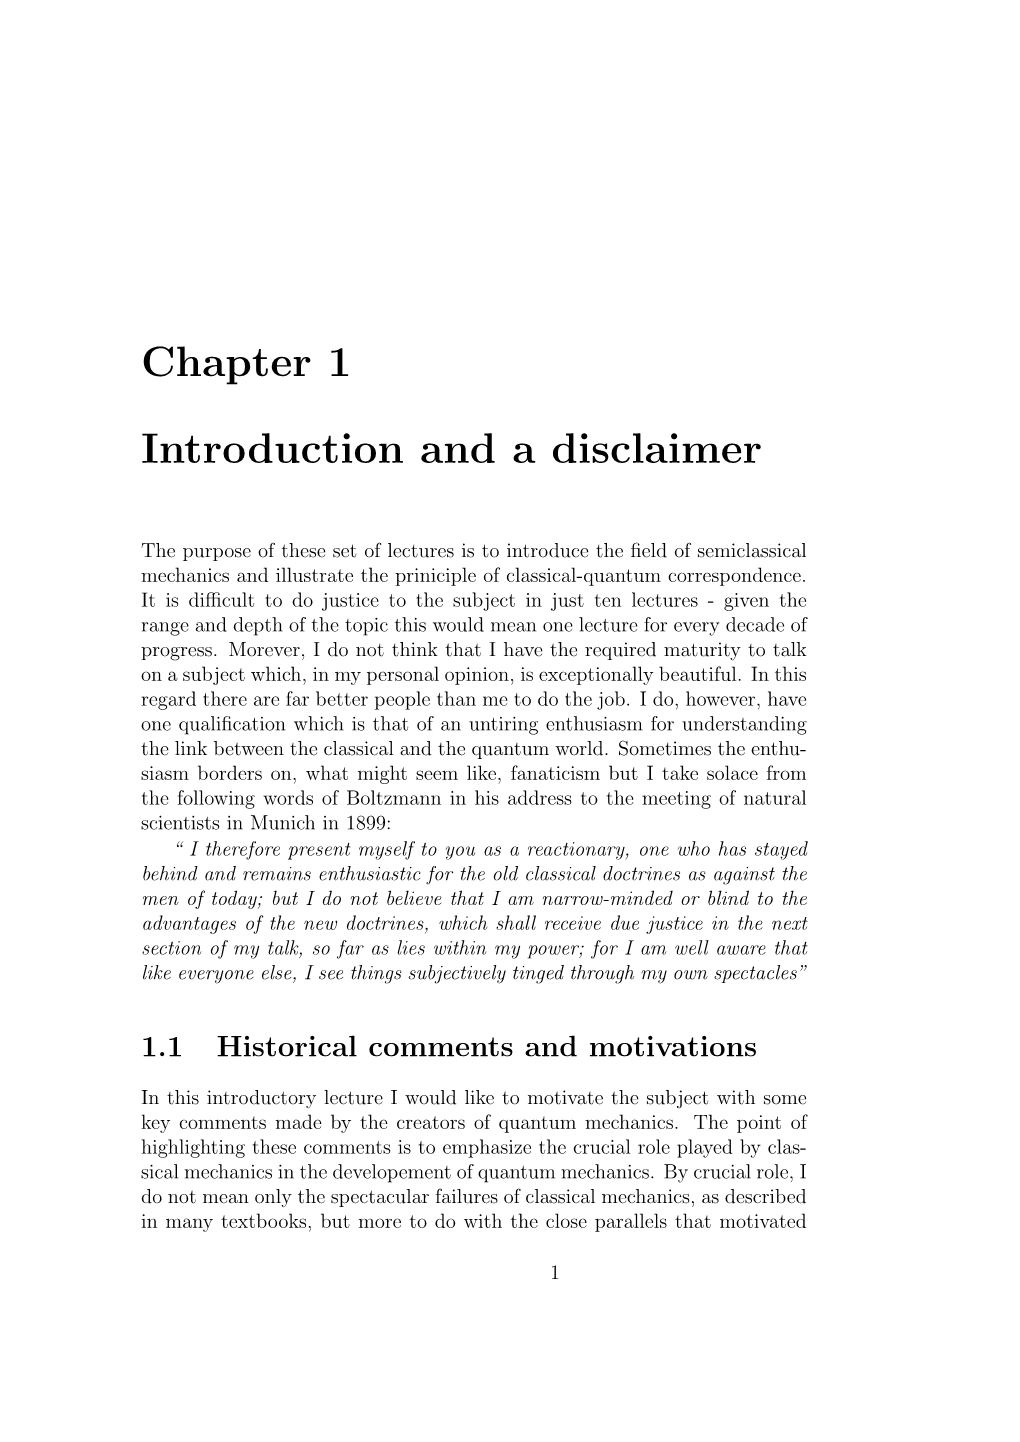 Chapter 1 Introduction and a Disclaimer